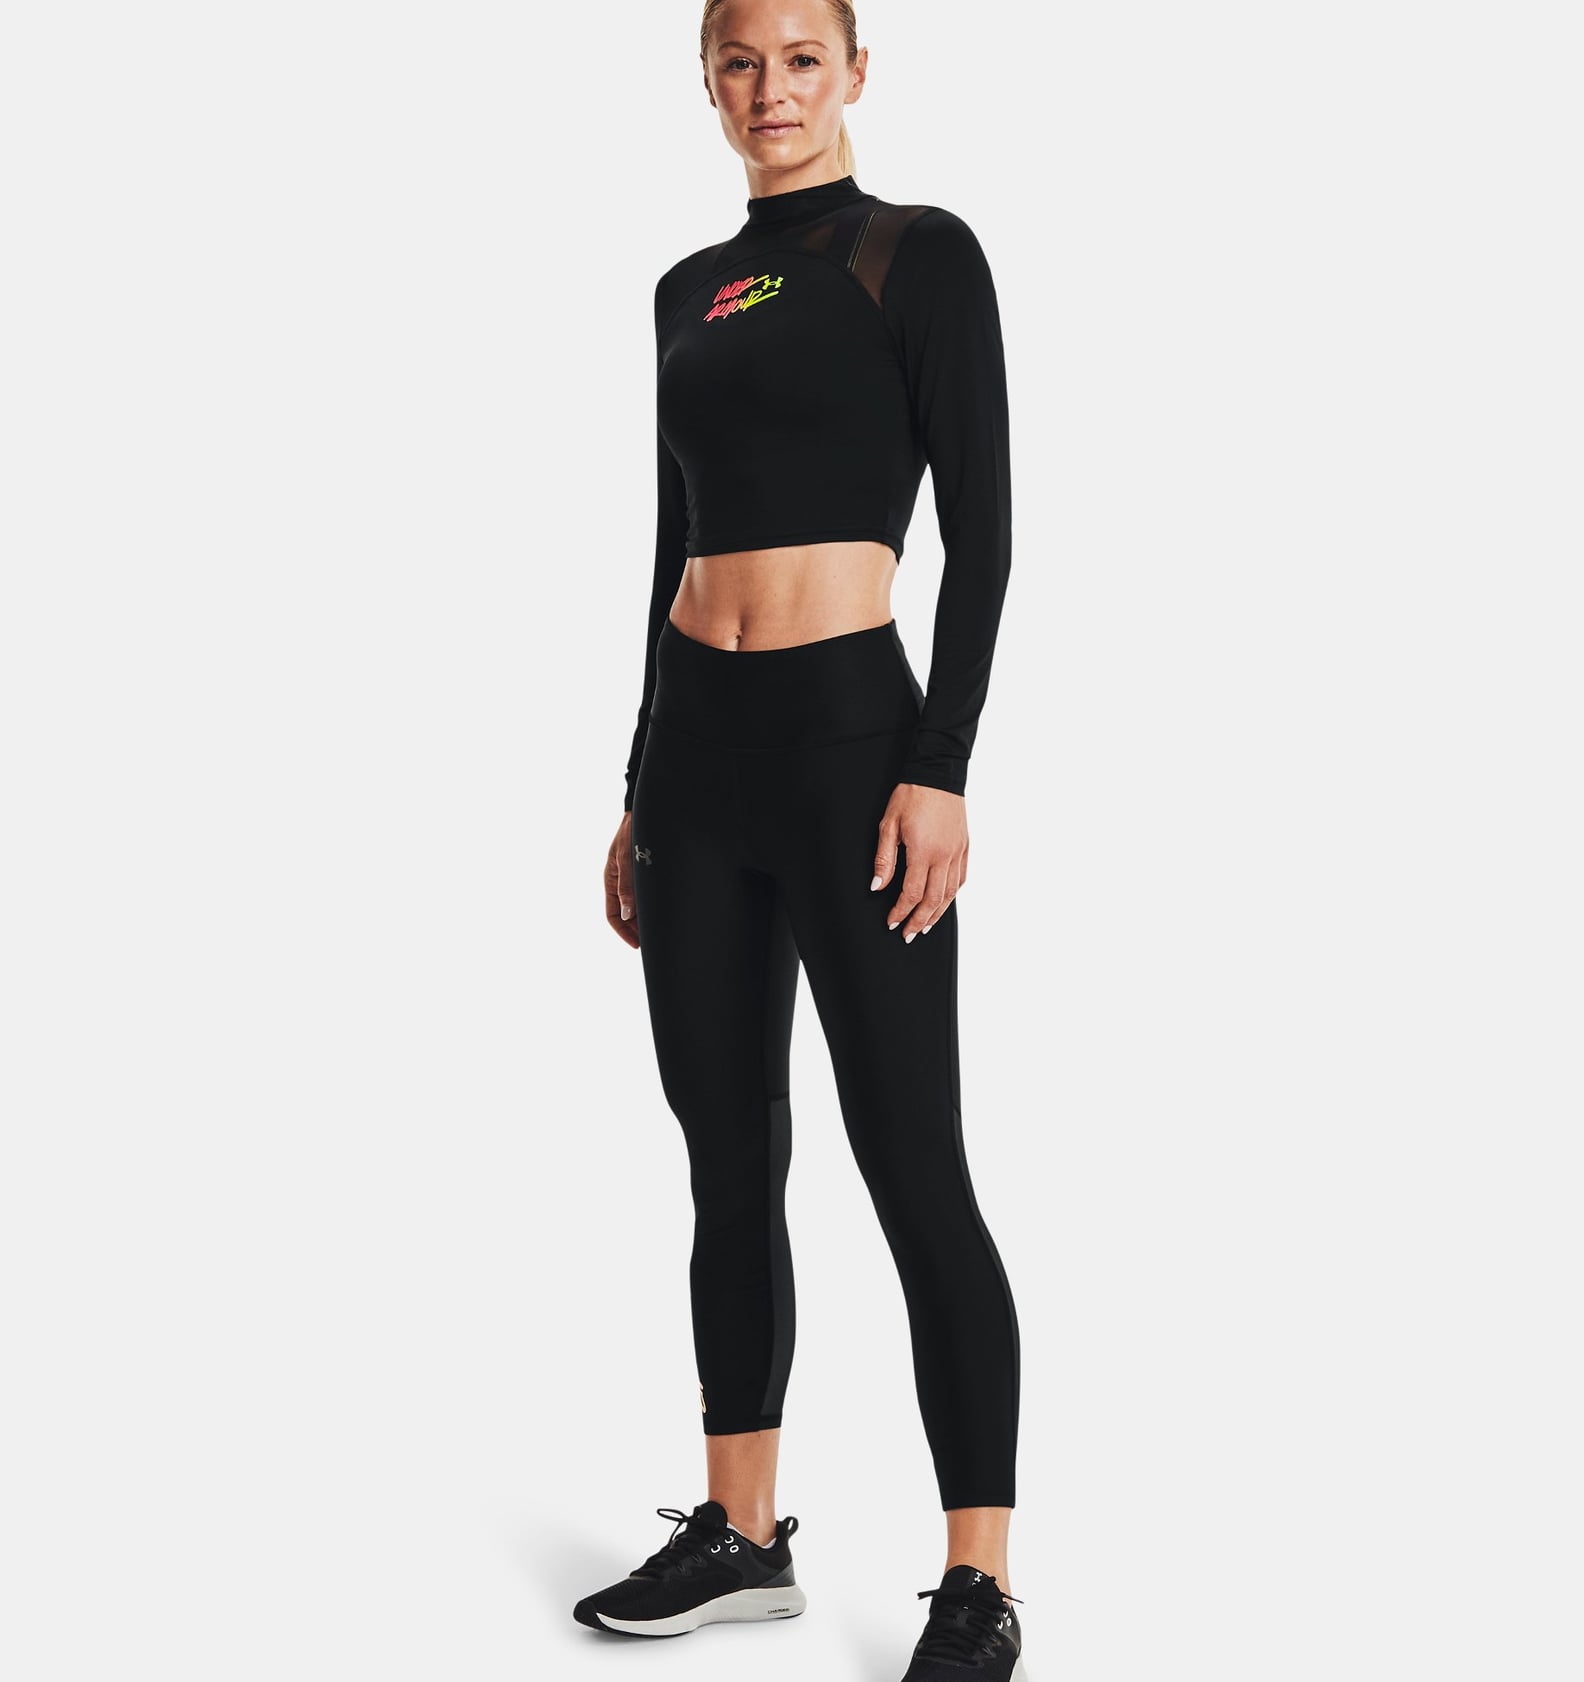 The Best Workout Tops From Under Armour | POPSUGAR Fitness